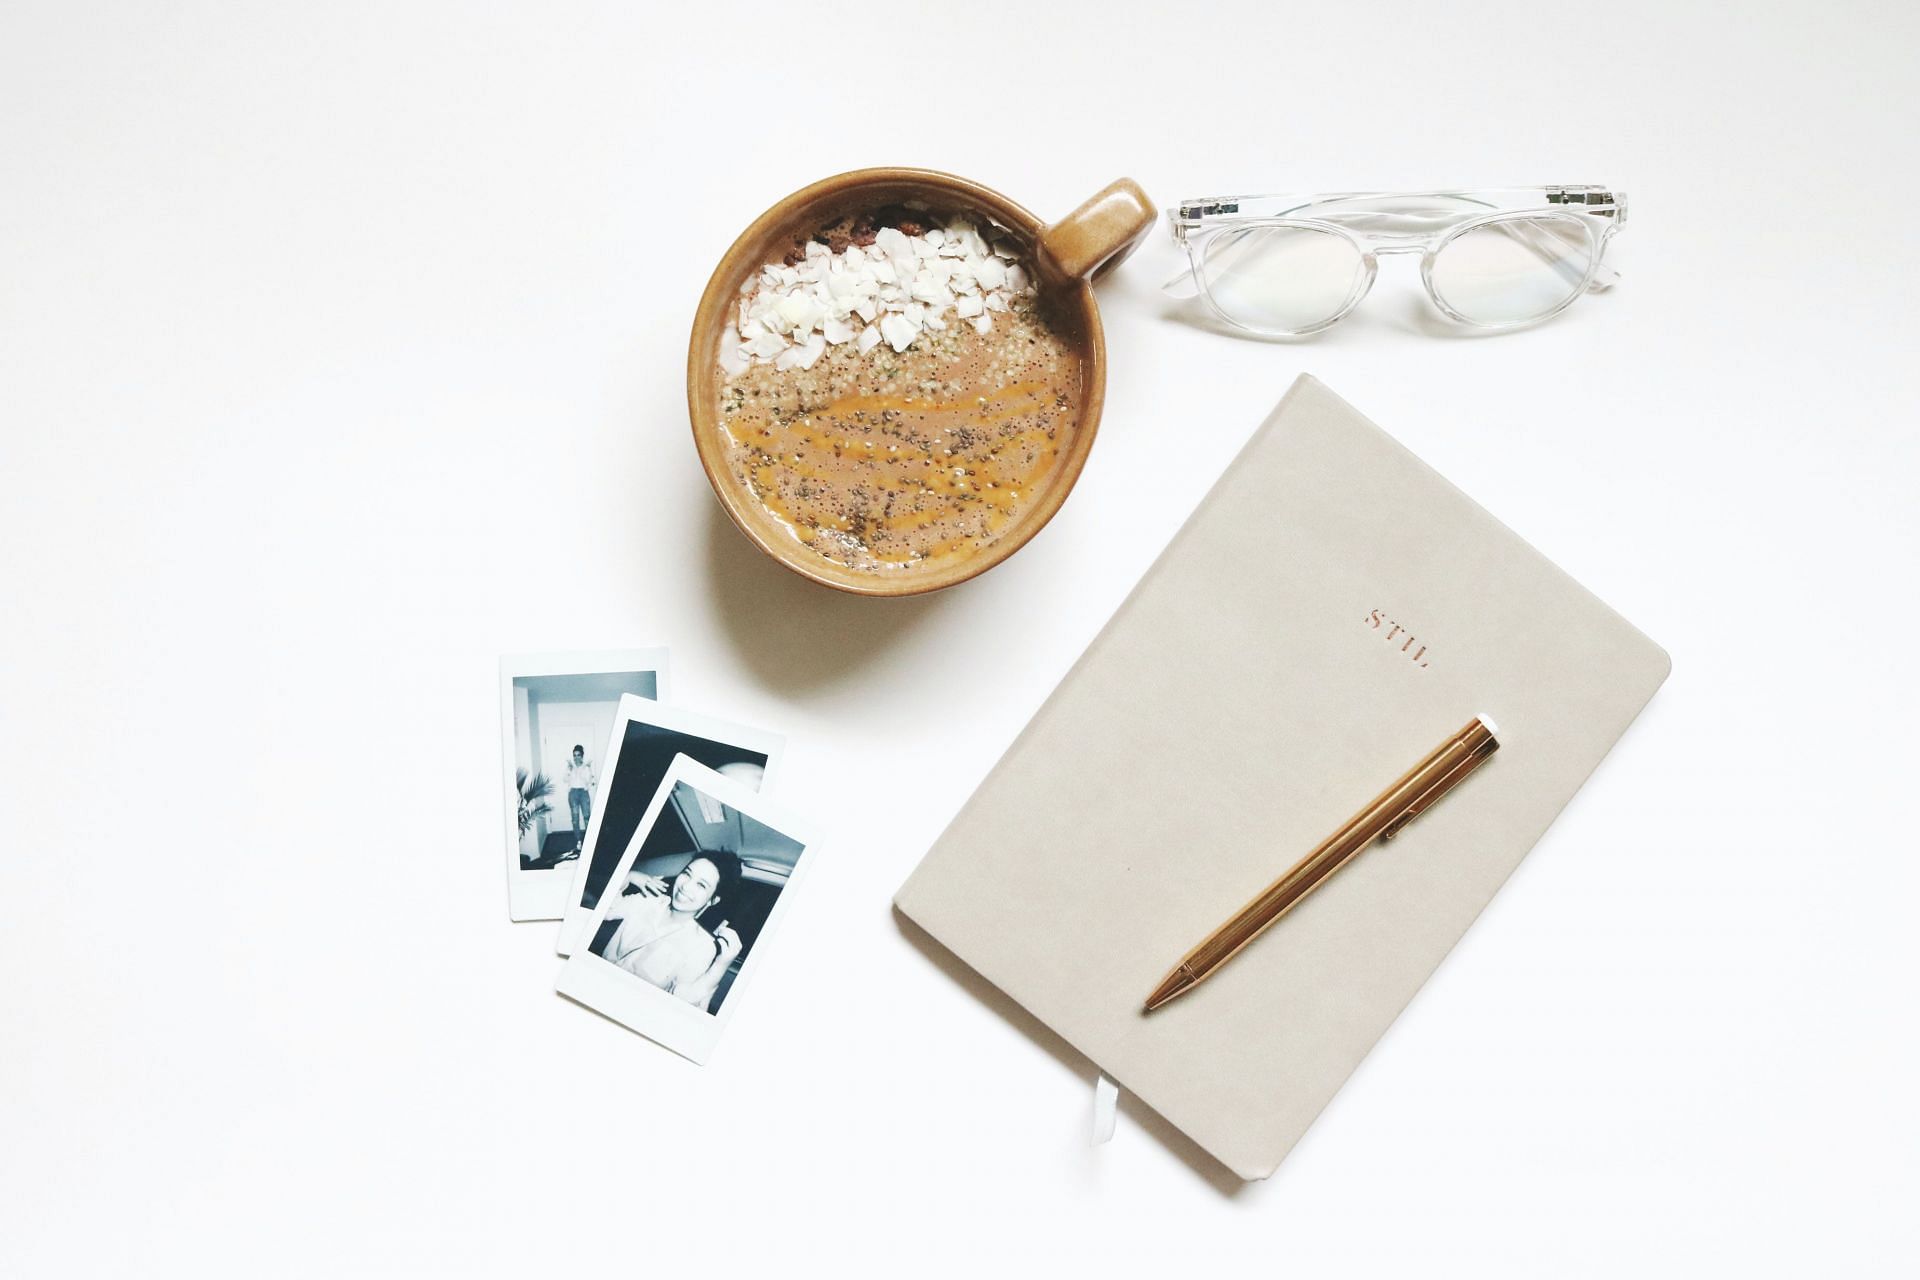 Journaling and mental health are intricately linked. (Image via Pexels/ Madison Inouye)